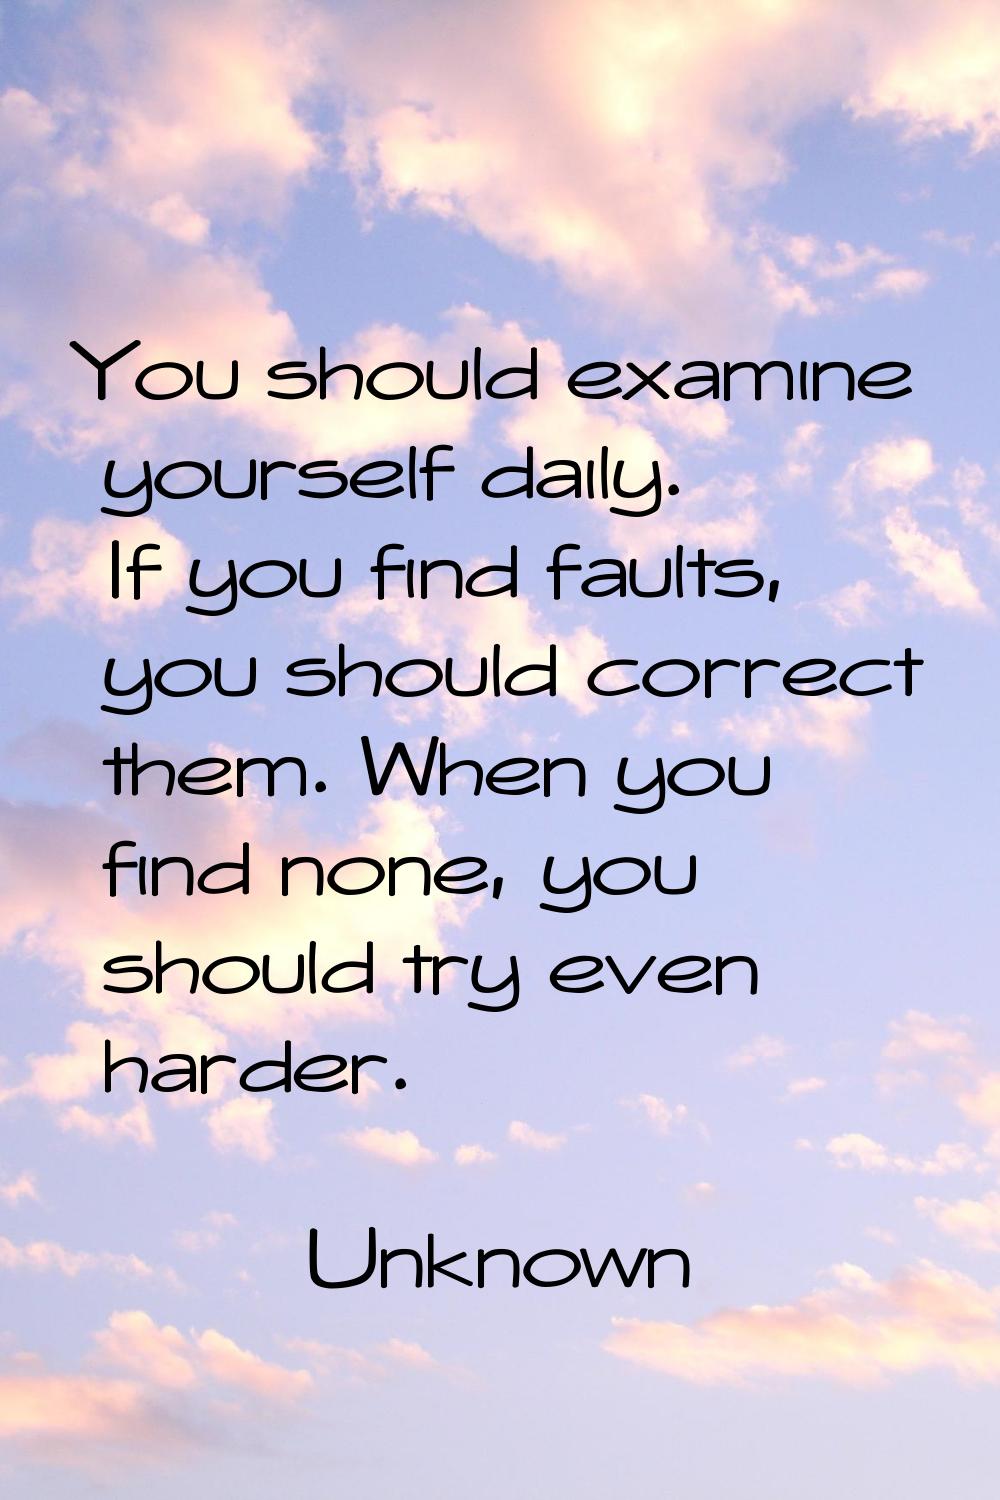 You should examine yourself daily. If you find faults, you should correct them. When you find none,